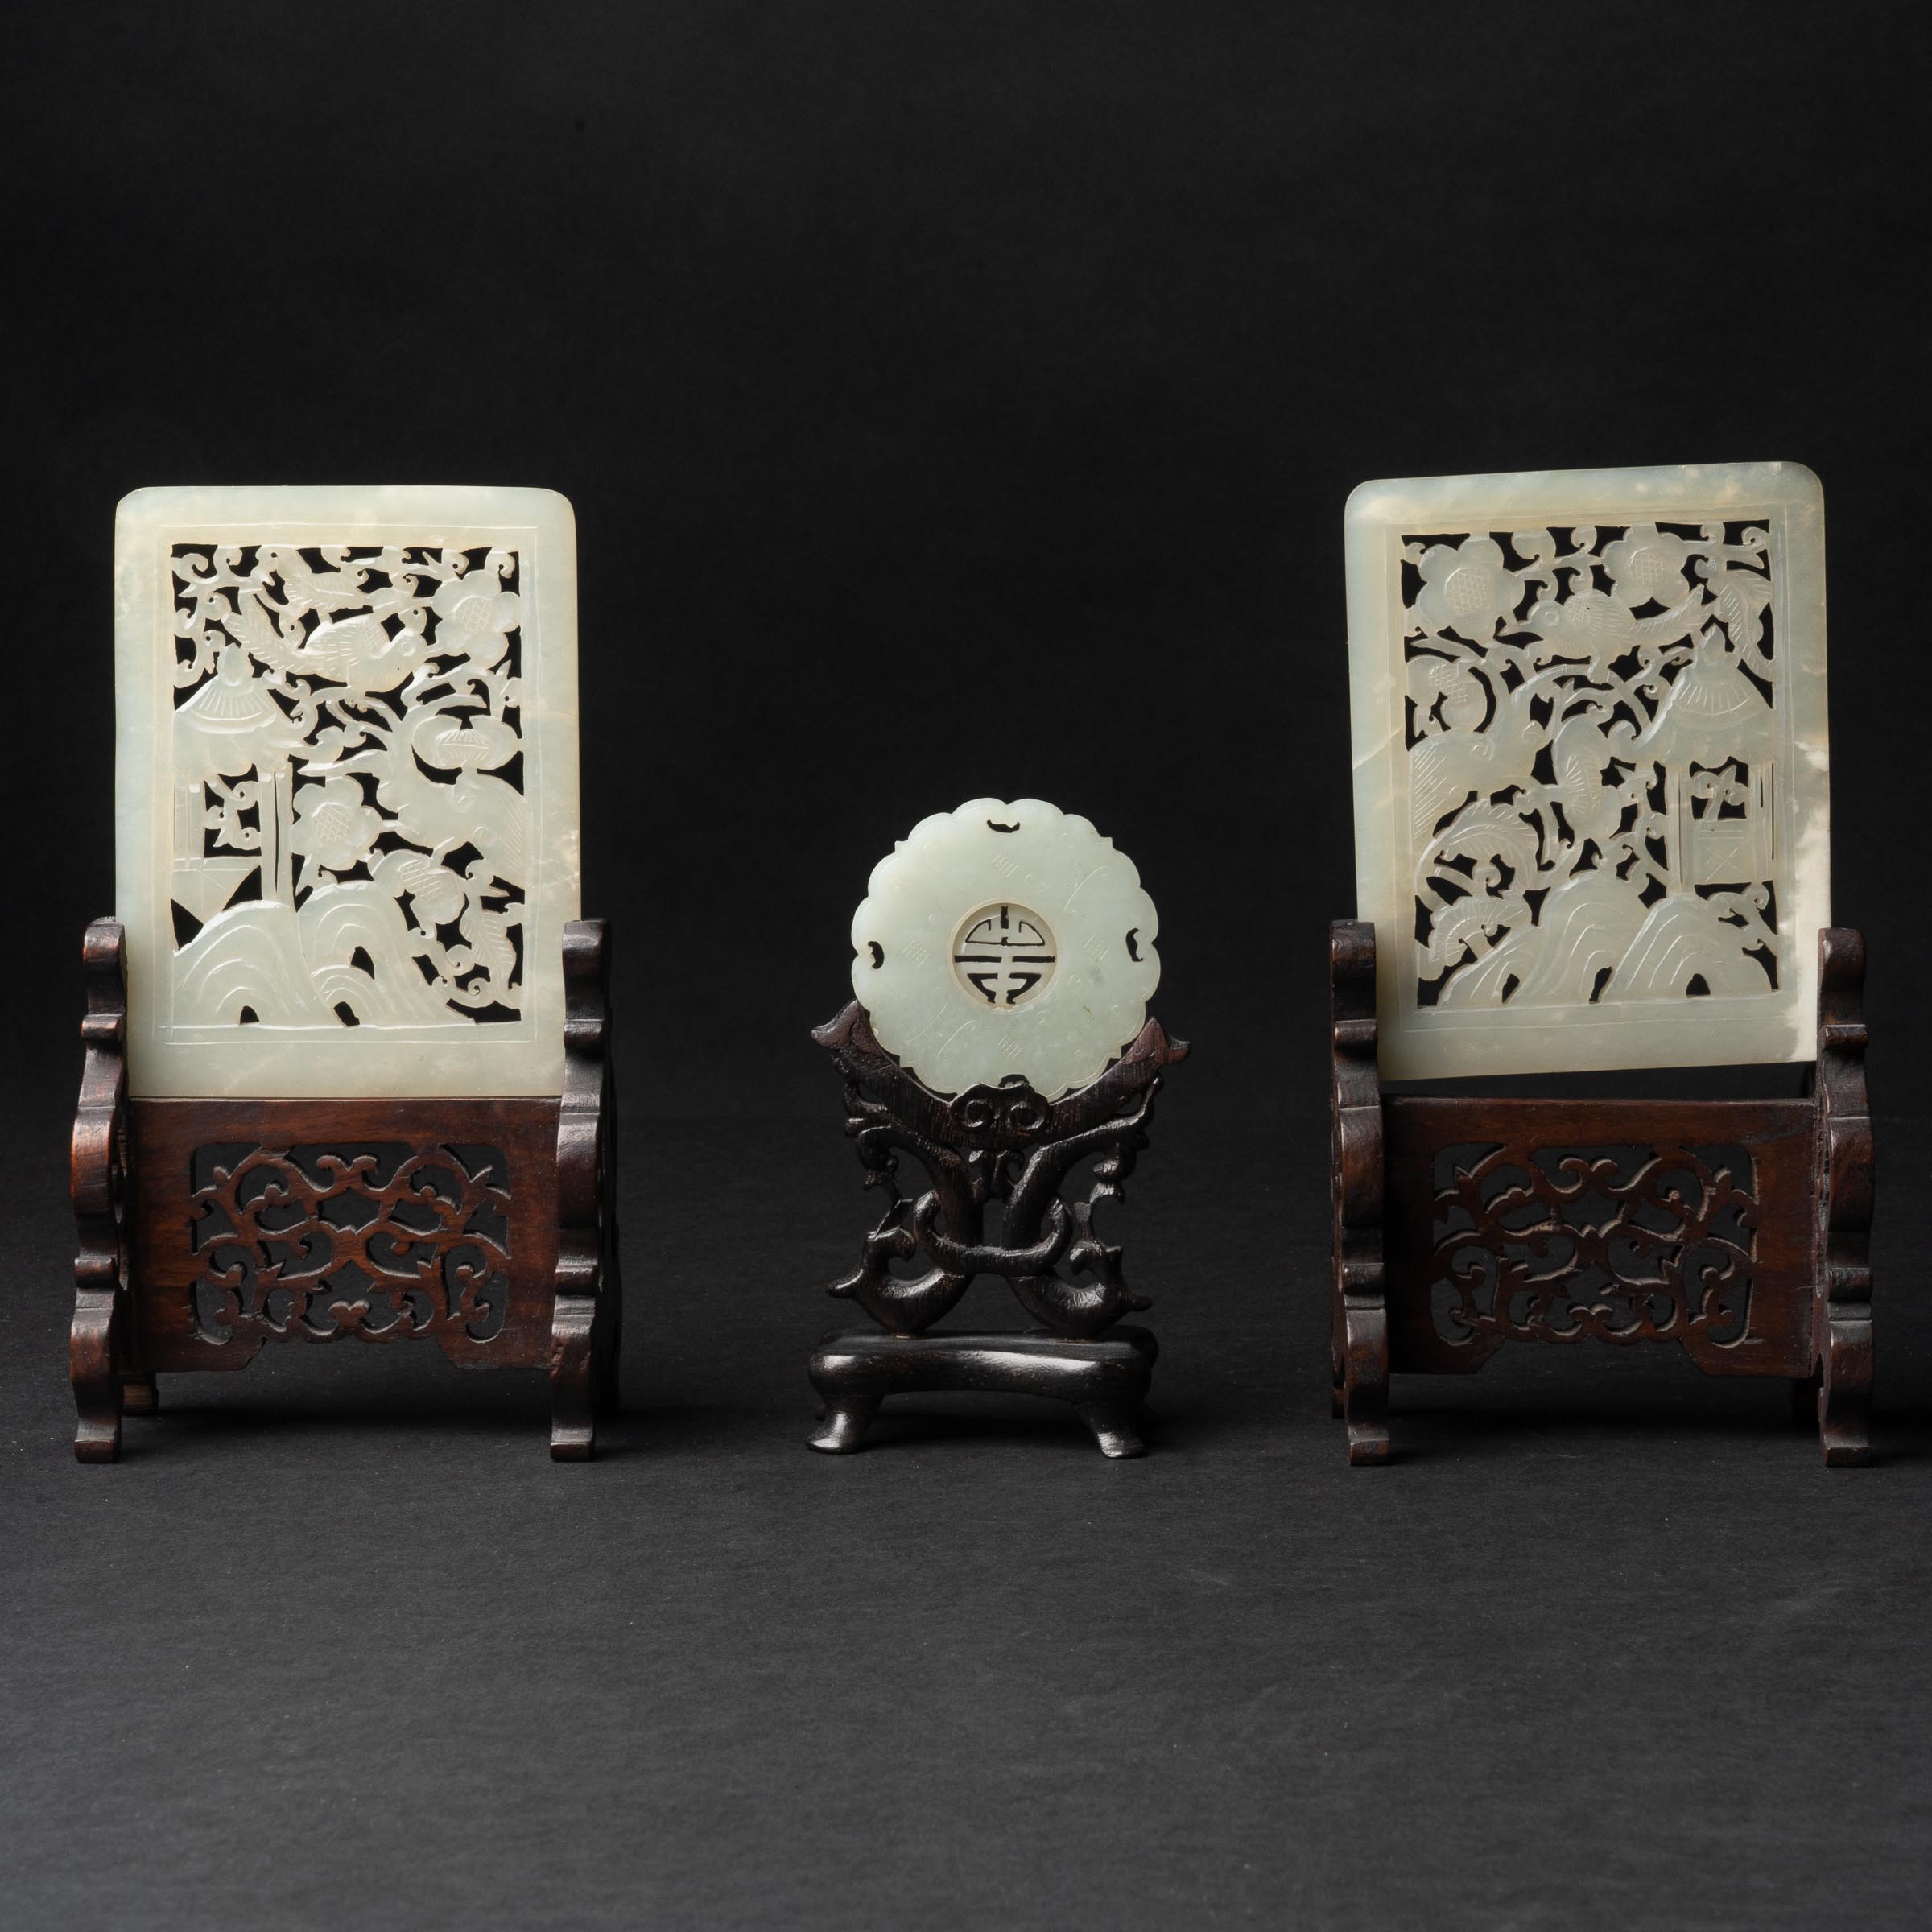 A White Jade Circular Plaque, Together with A Pair of Serpentine Carved Table Screens, 19th Century